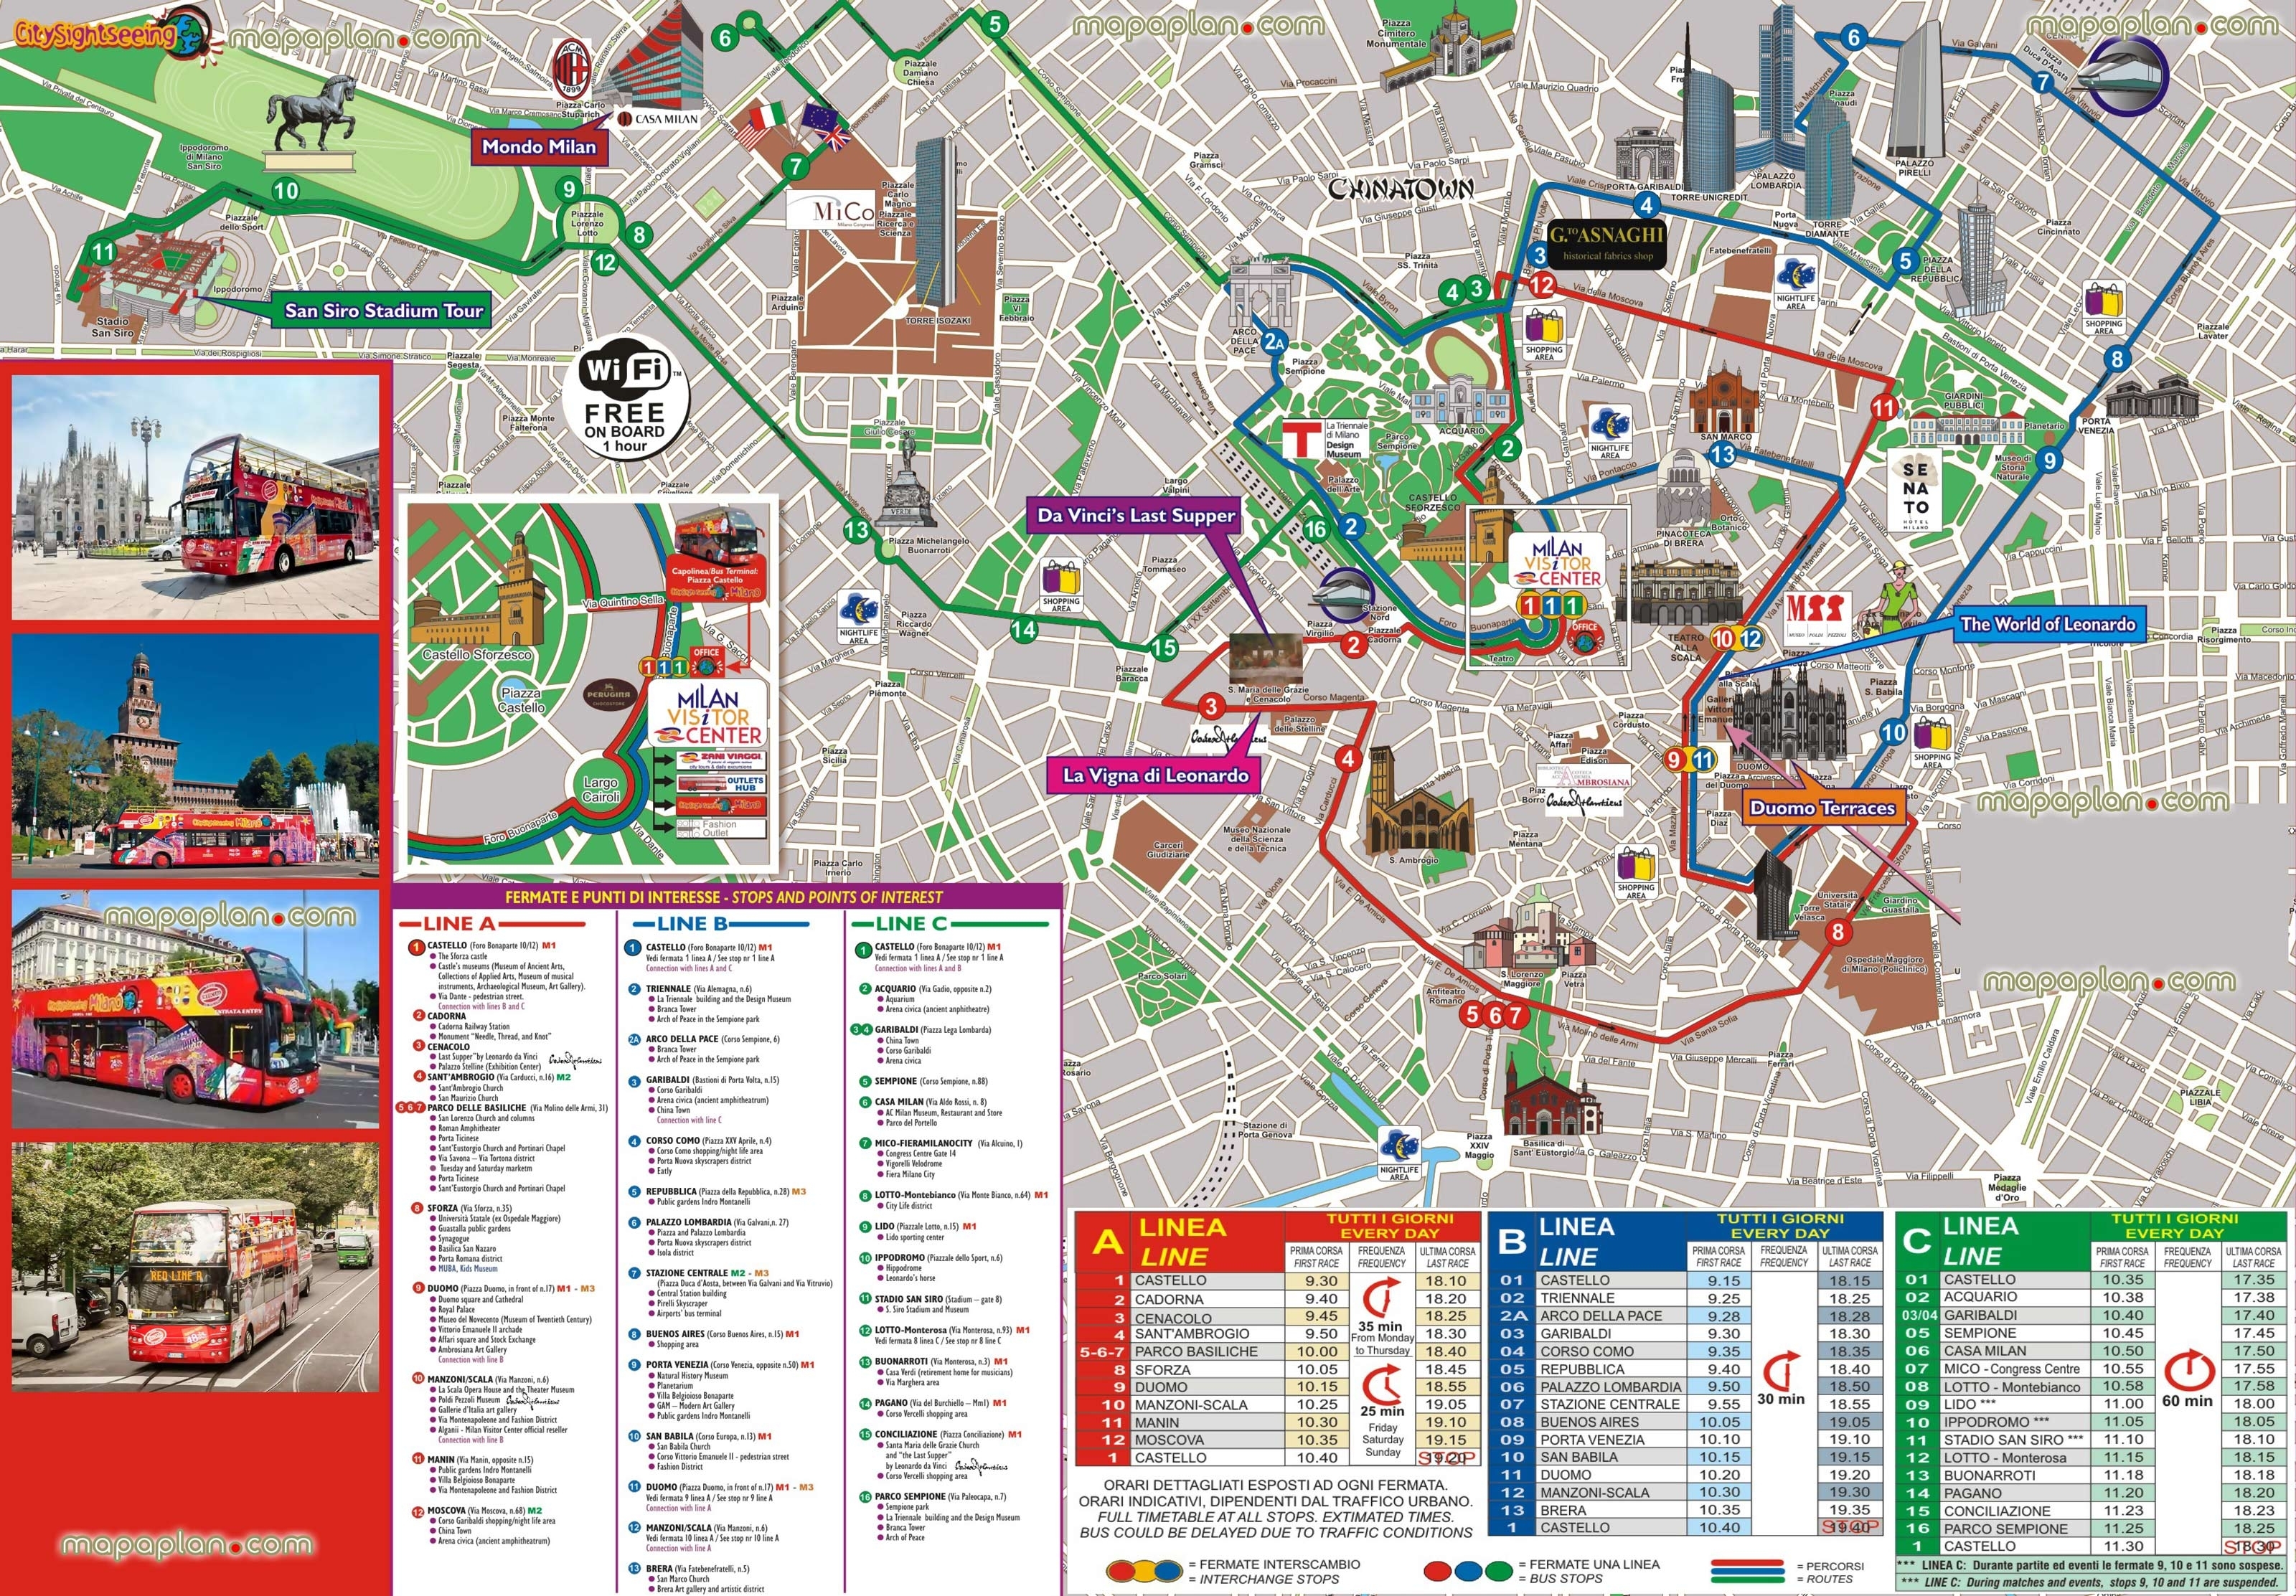 tourist-attractions-milan-map-hopon-hopoff-bus-of-city-sightseeing-tour-in